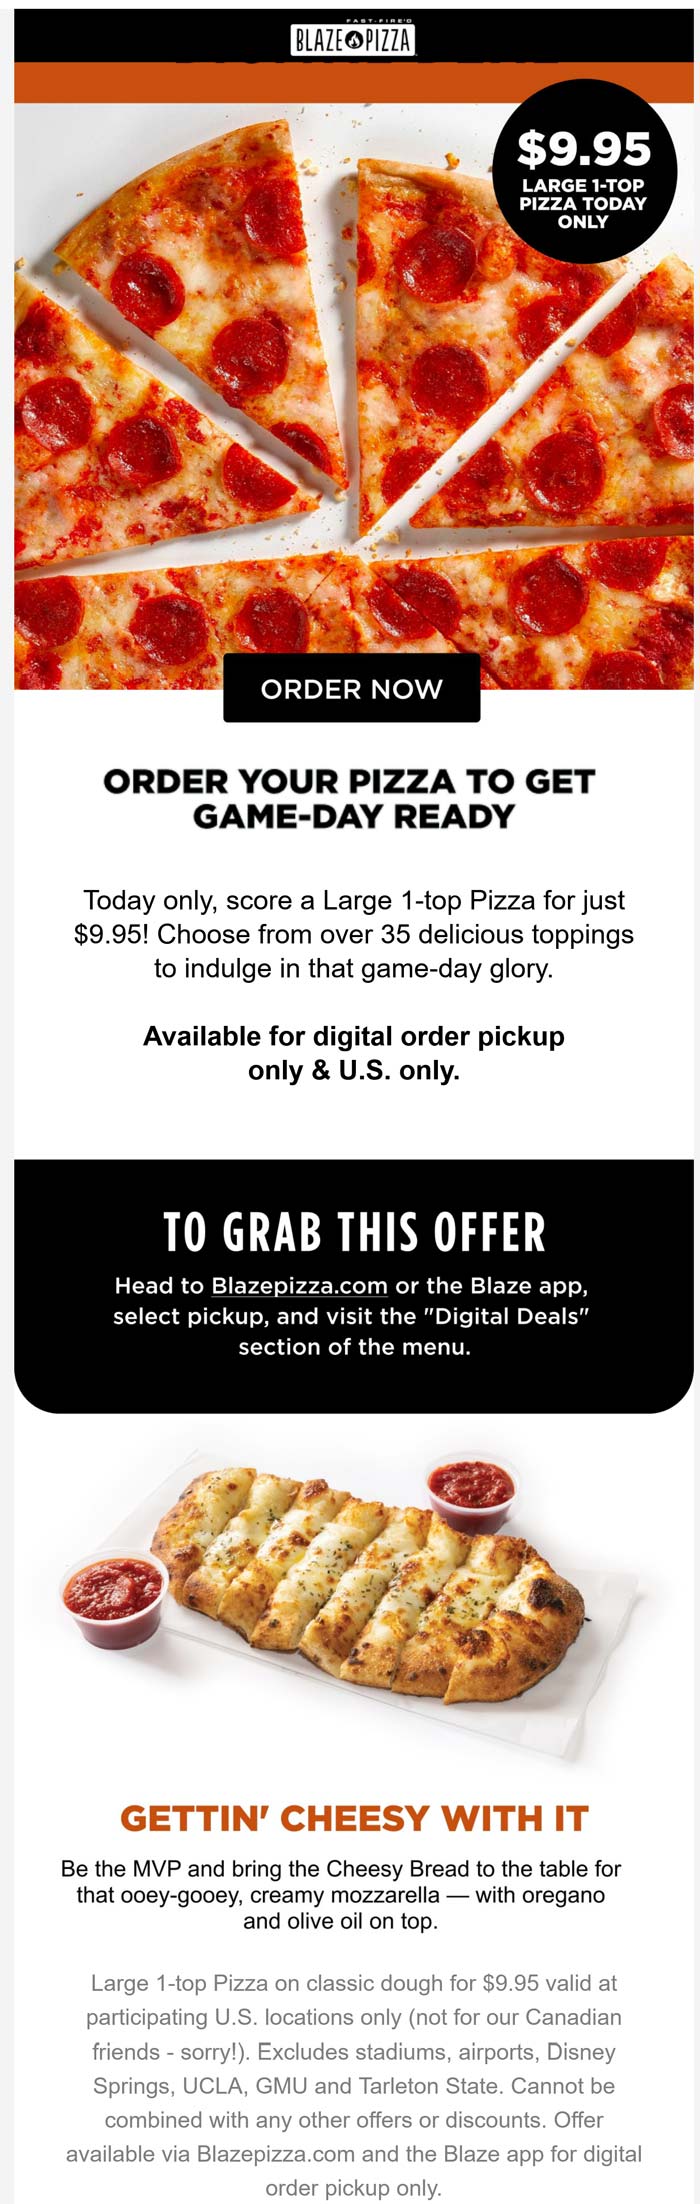 Blaze Pizza restaurants Coupon  Large 1-topping for $10 today at Blaze Pizza #blazepizza 